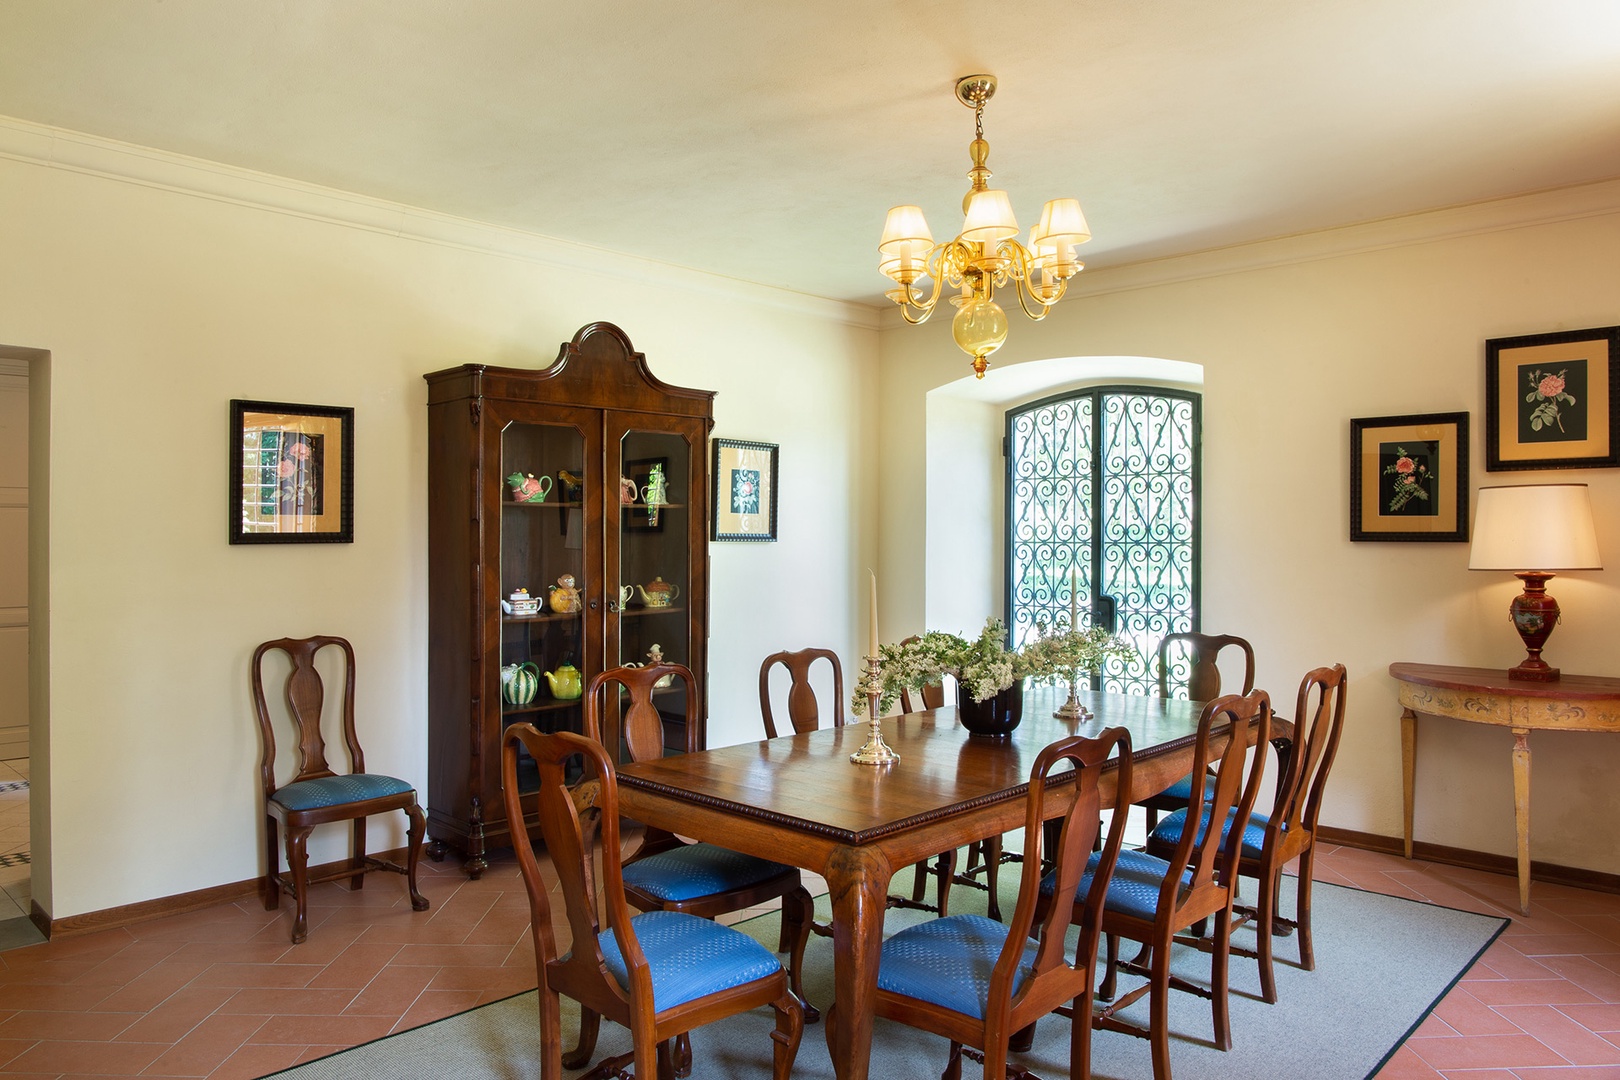 The elegant dining area opens onto the gardens and pool area through French doors.